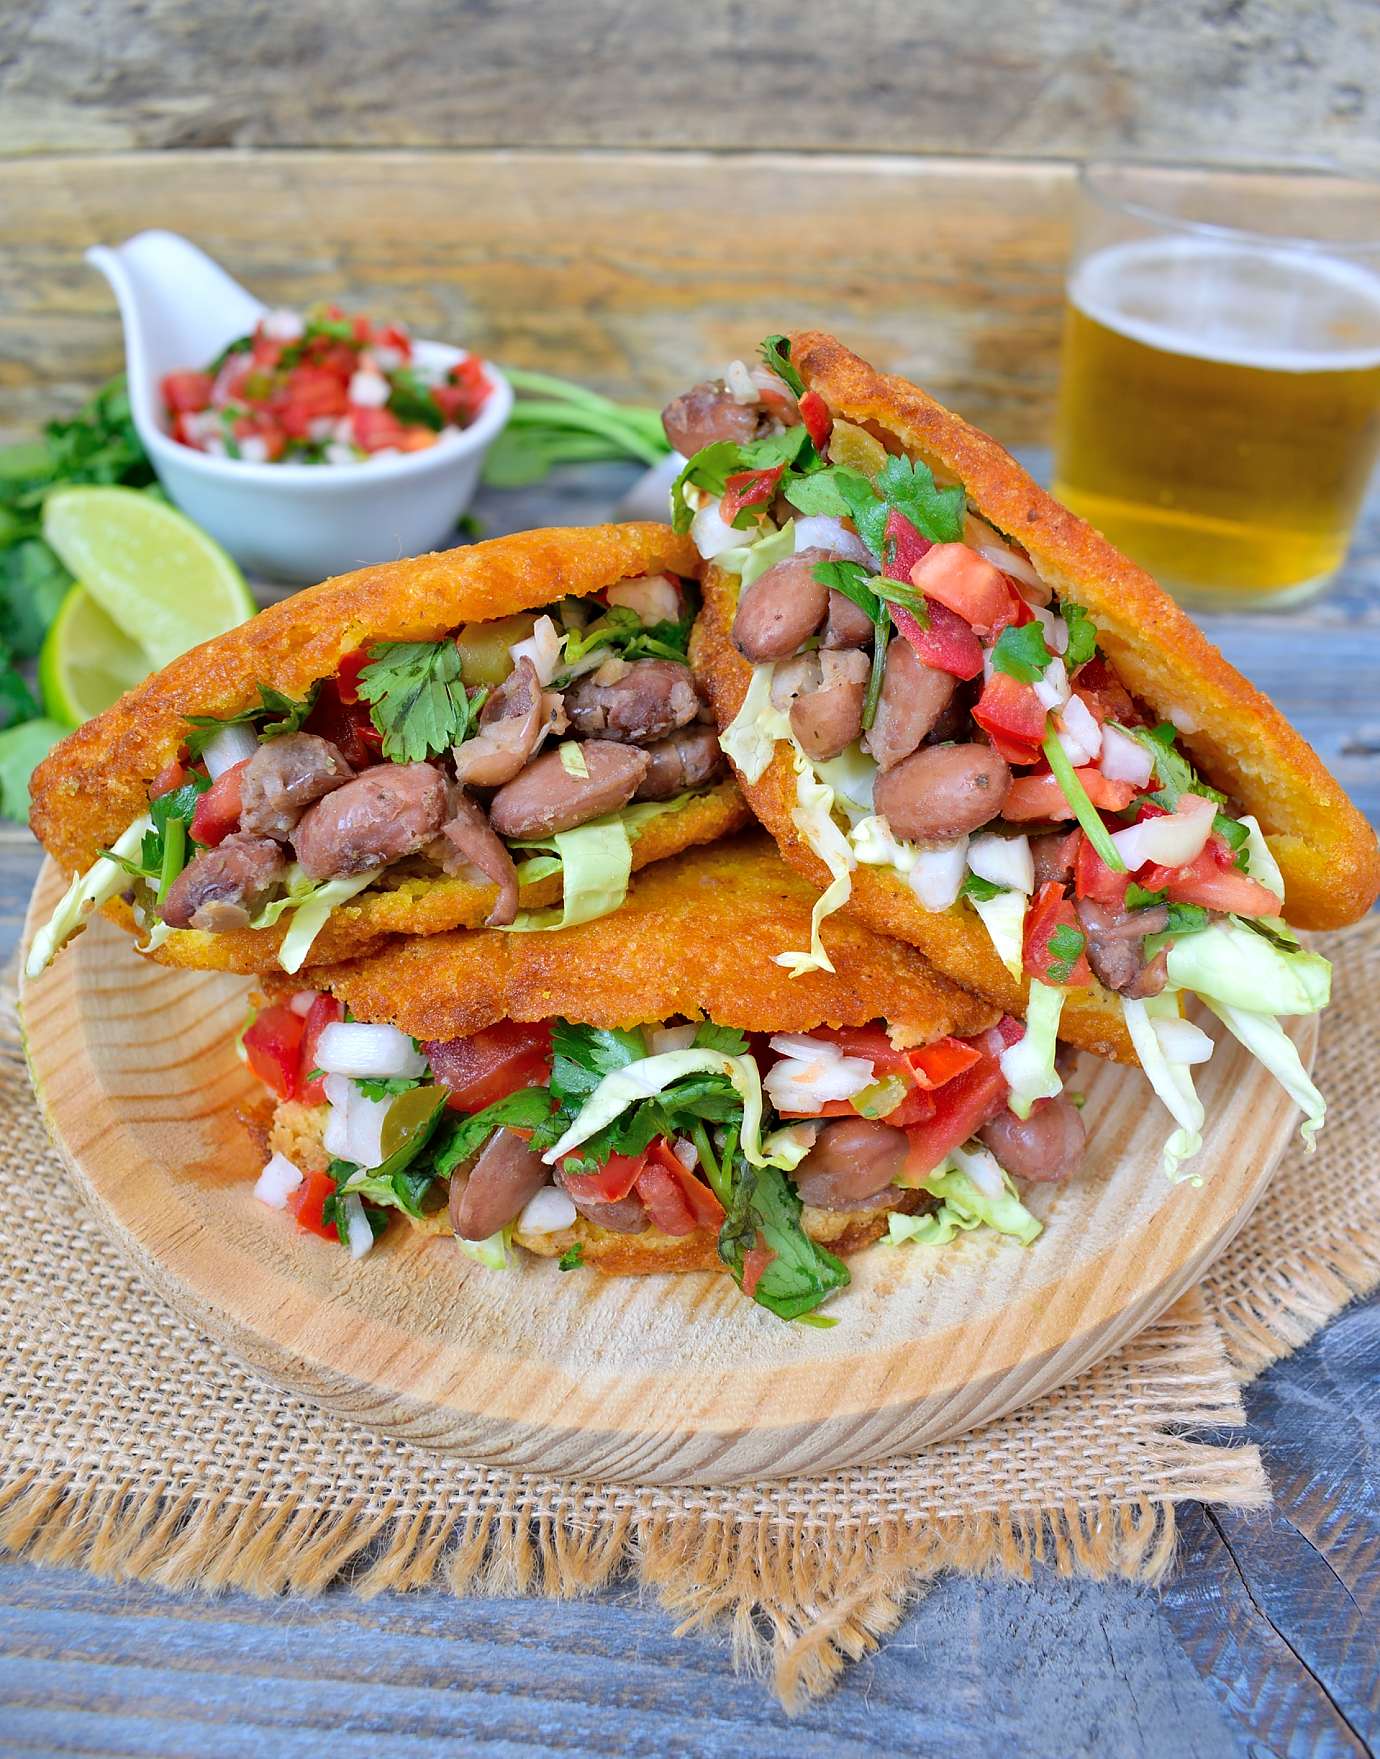 These vegan gorditas are full of fresh corn-y, street foody-y goodness. They look simple but will definitely fill you up! Great for lunch or dinner.